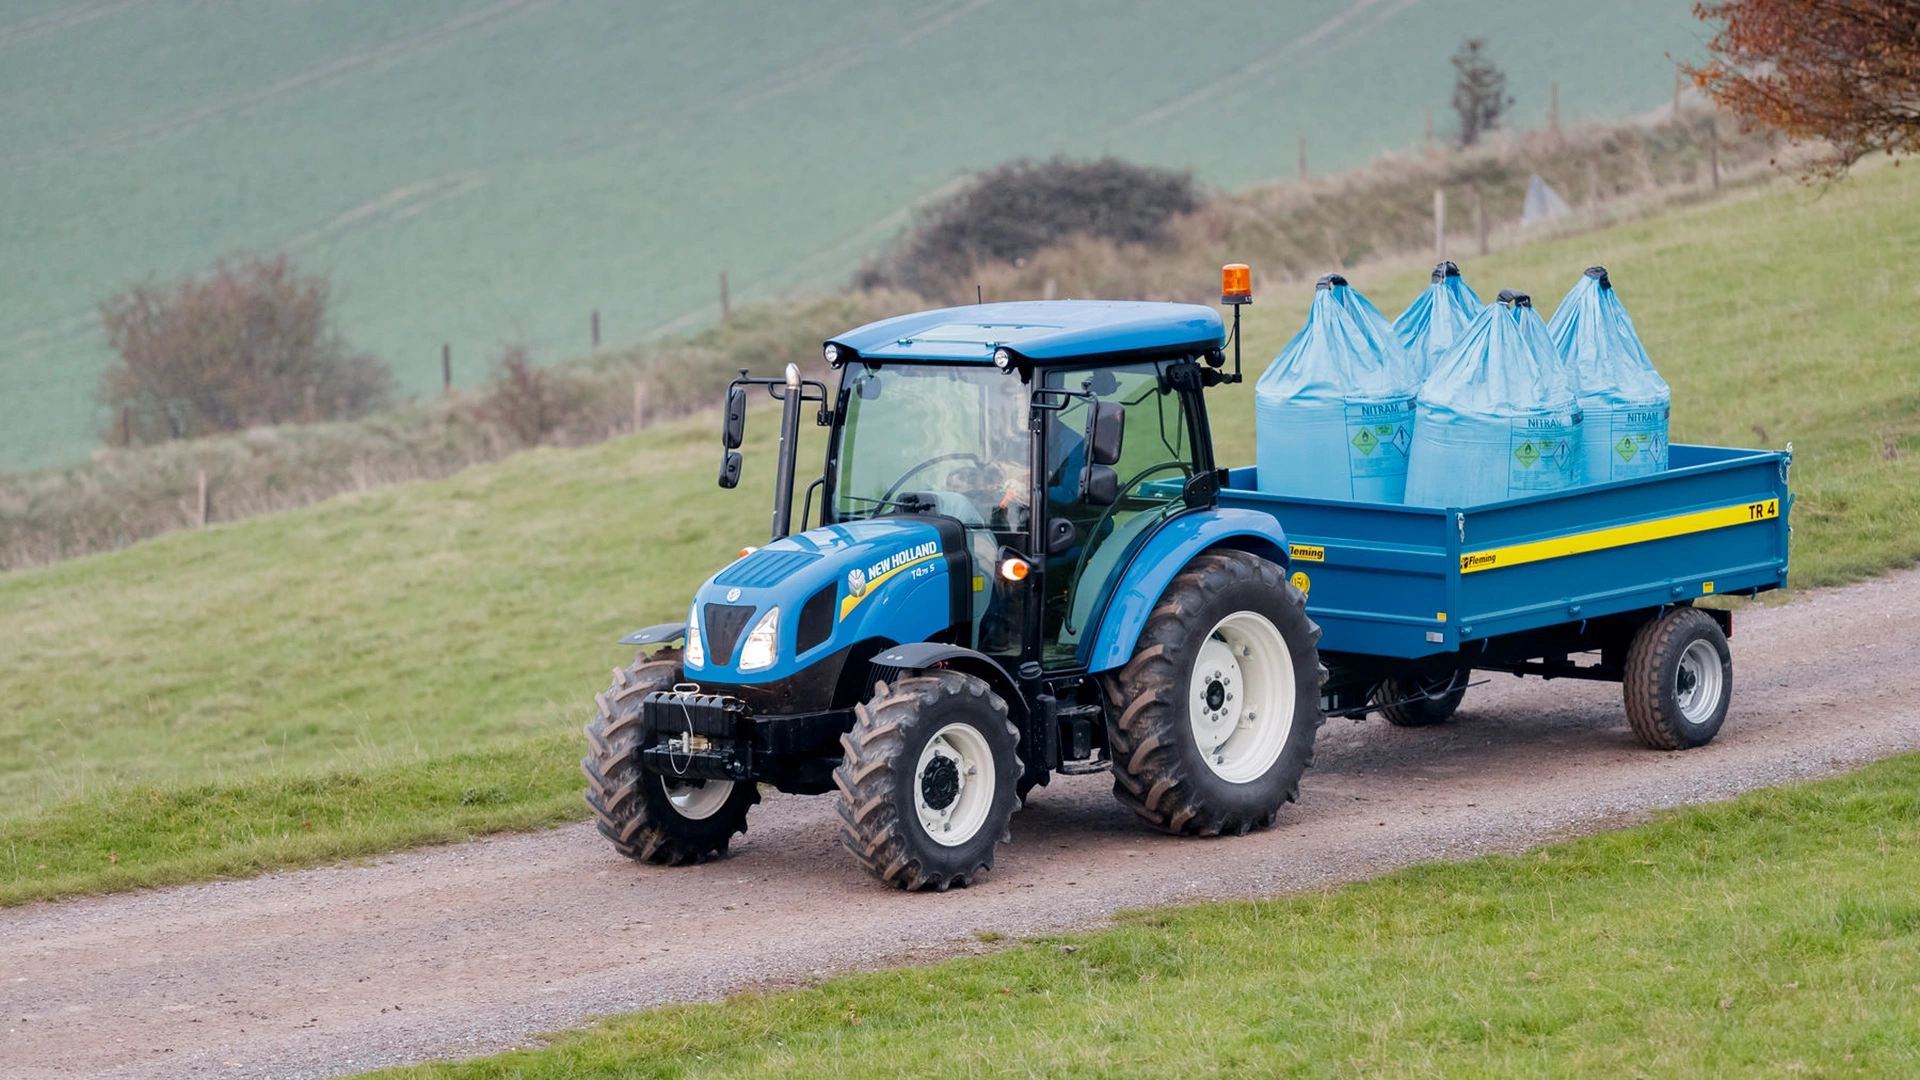 New Holland T4S agricultural tractor engaged in transportation duties